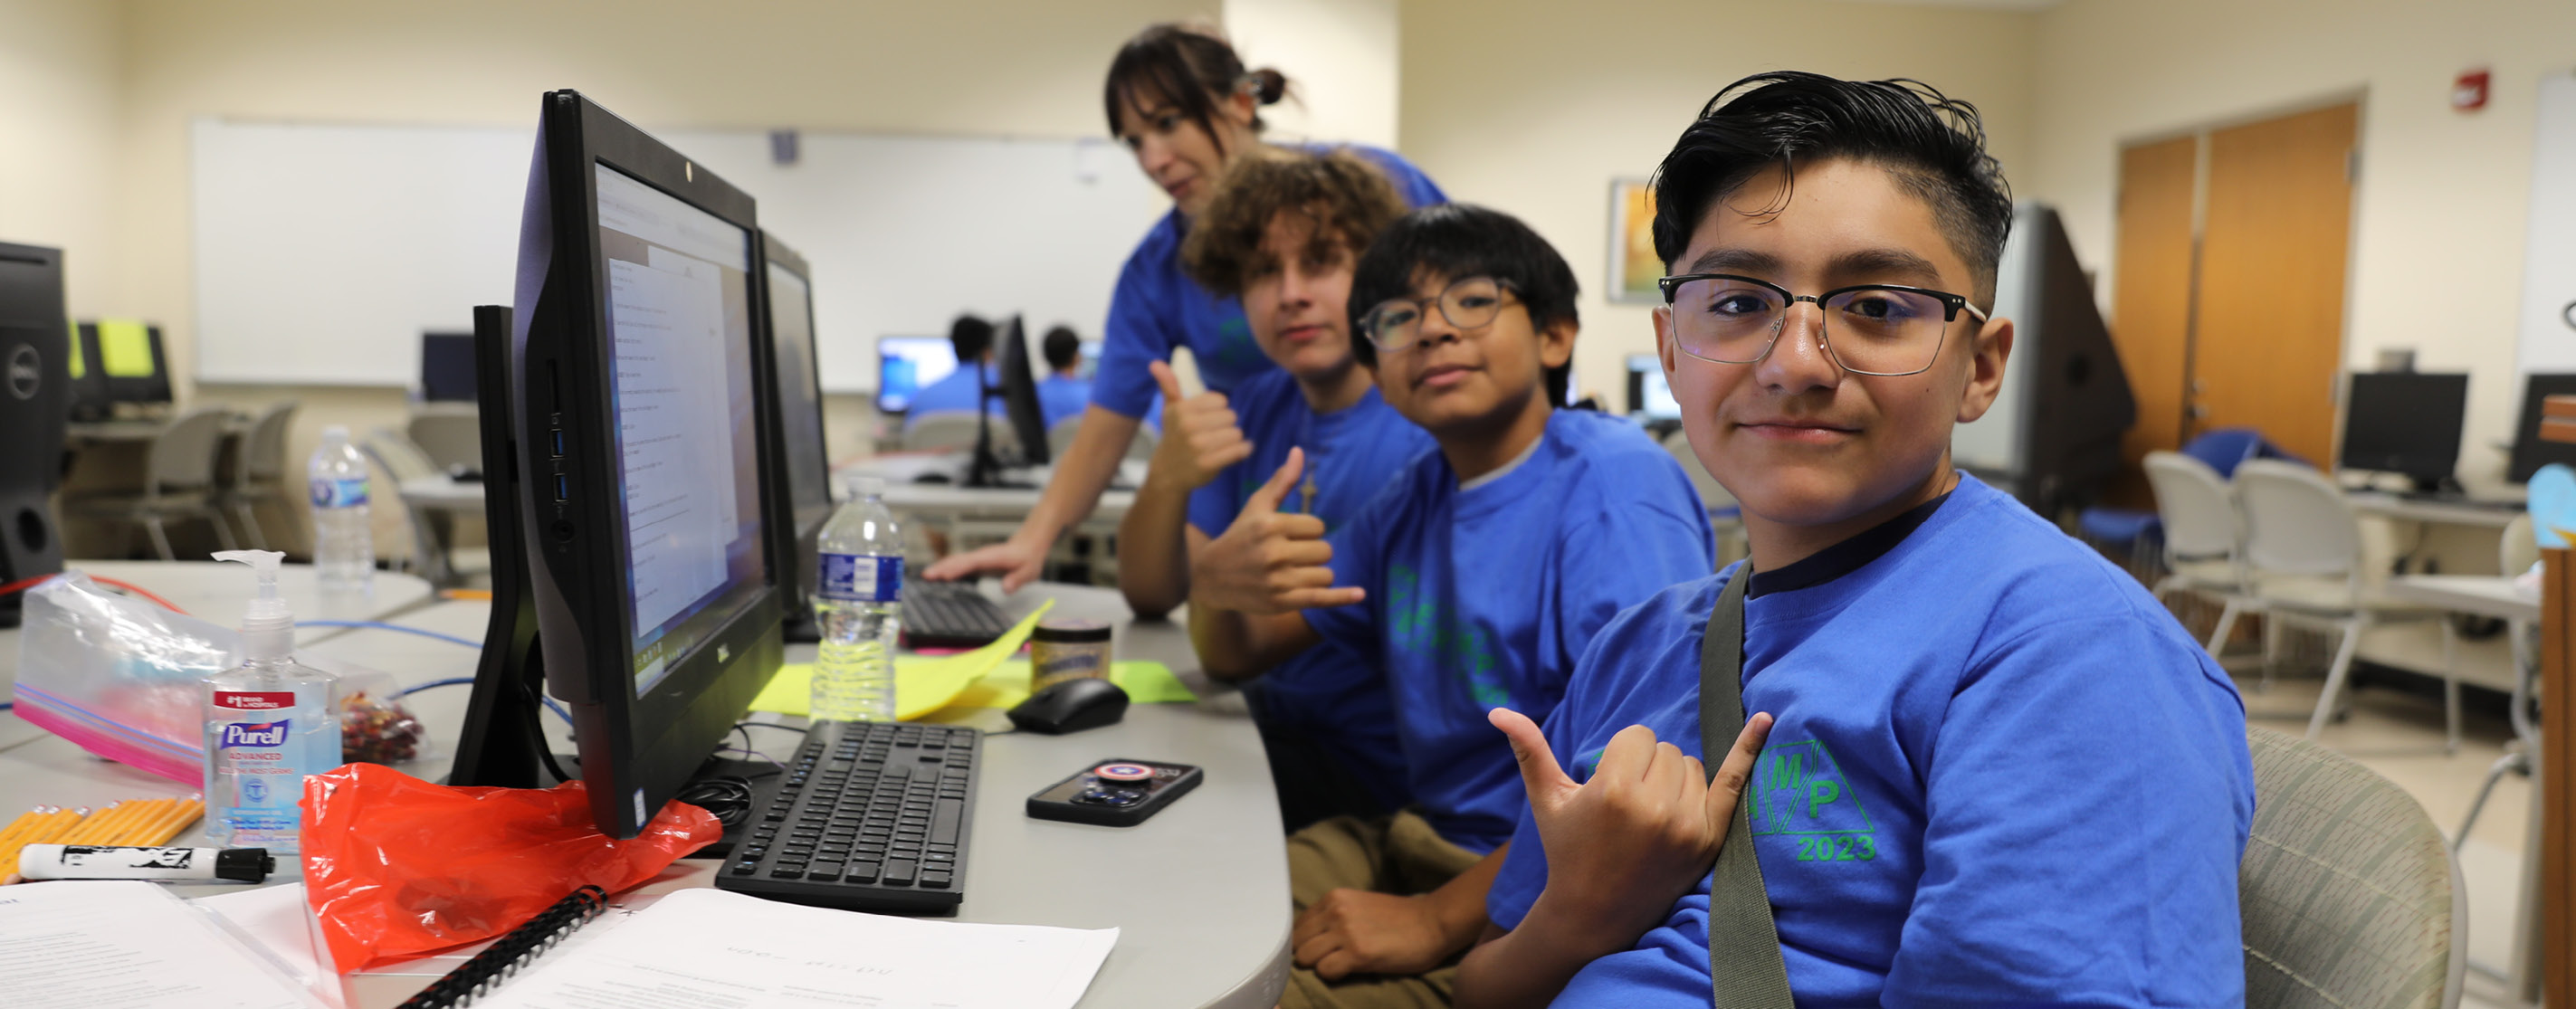 UTEP Empowers Young Minds at AFA CyberCamp 